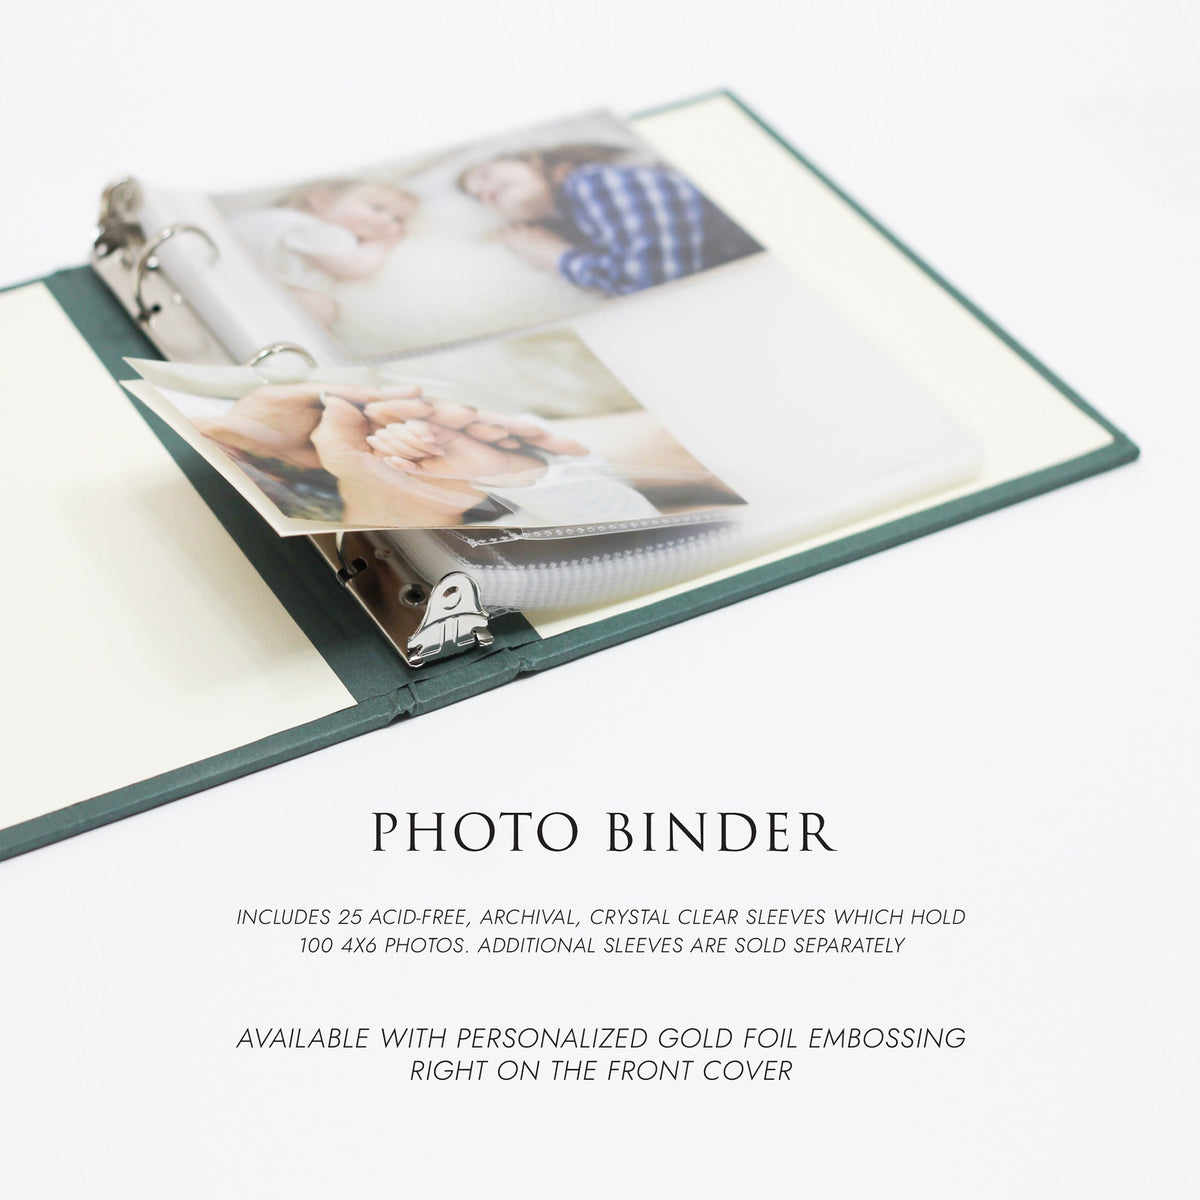 Medium Photo Binder For 4x6 Photos | Cover: Pearl Vegan Leather | Available Personalized